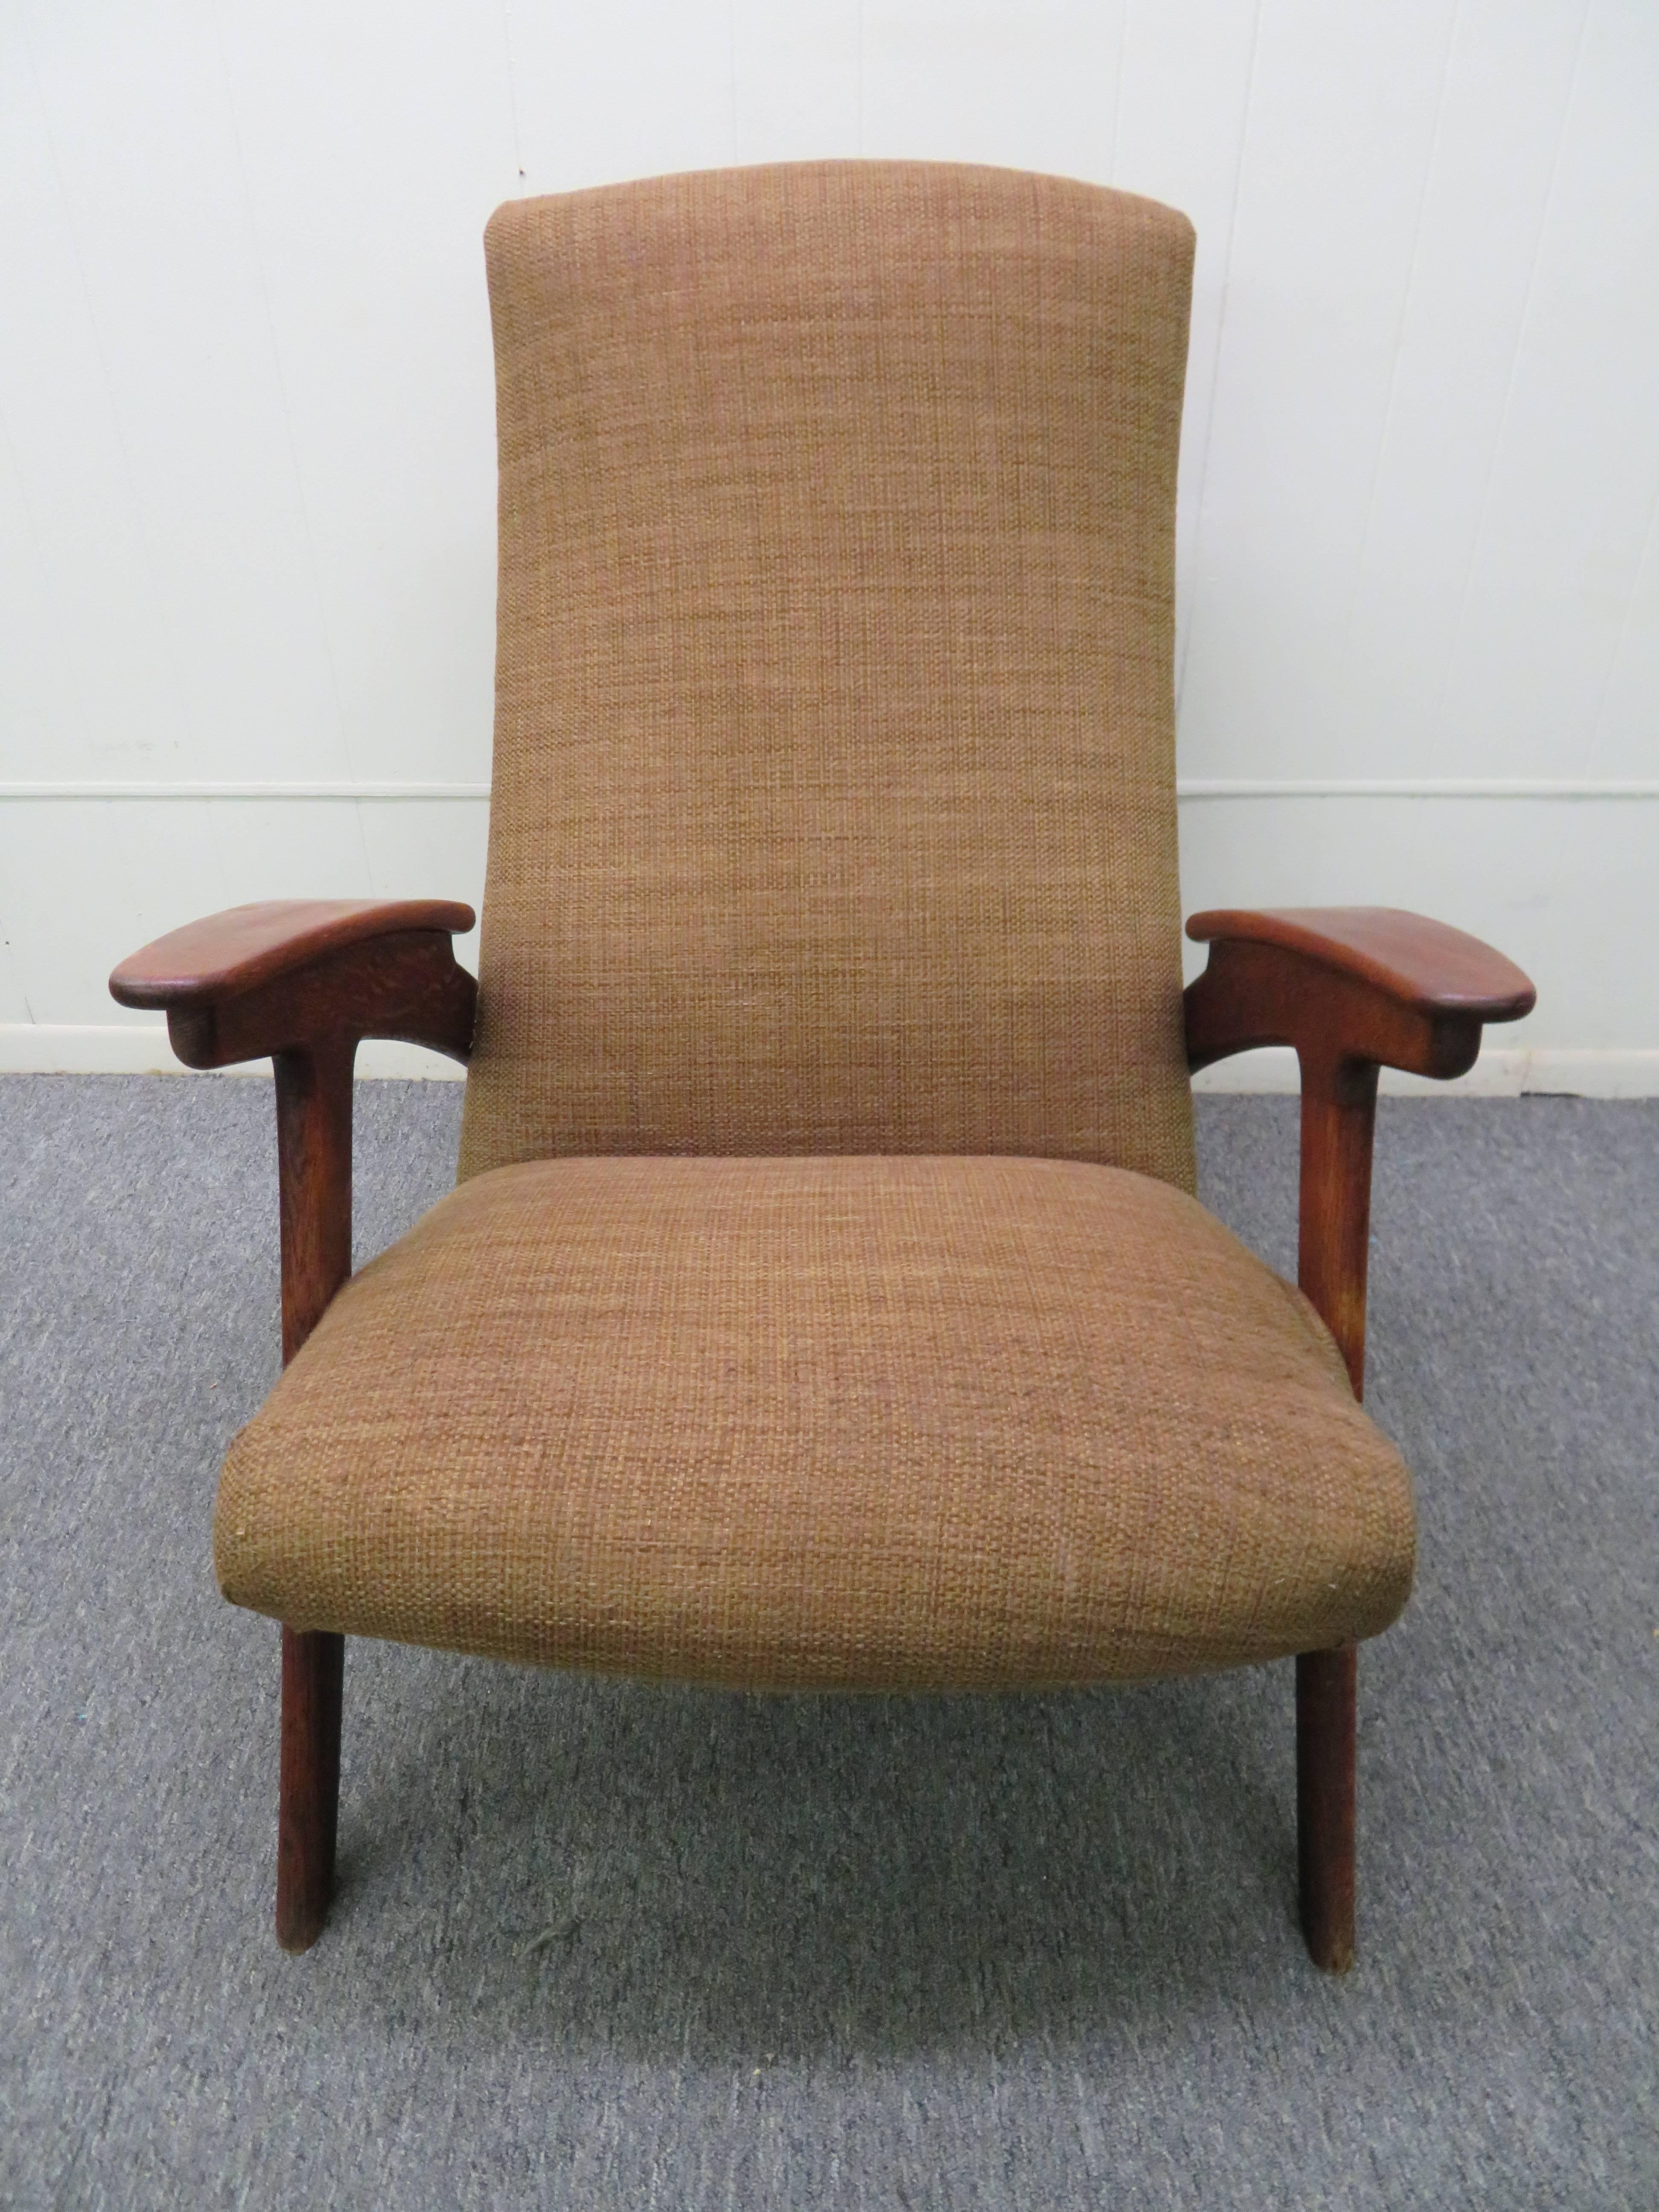 Upholstery Fantastic Danish Modern Paddle Arm Teak Lounge Chair Mid-Century For Sale